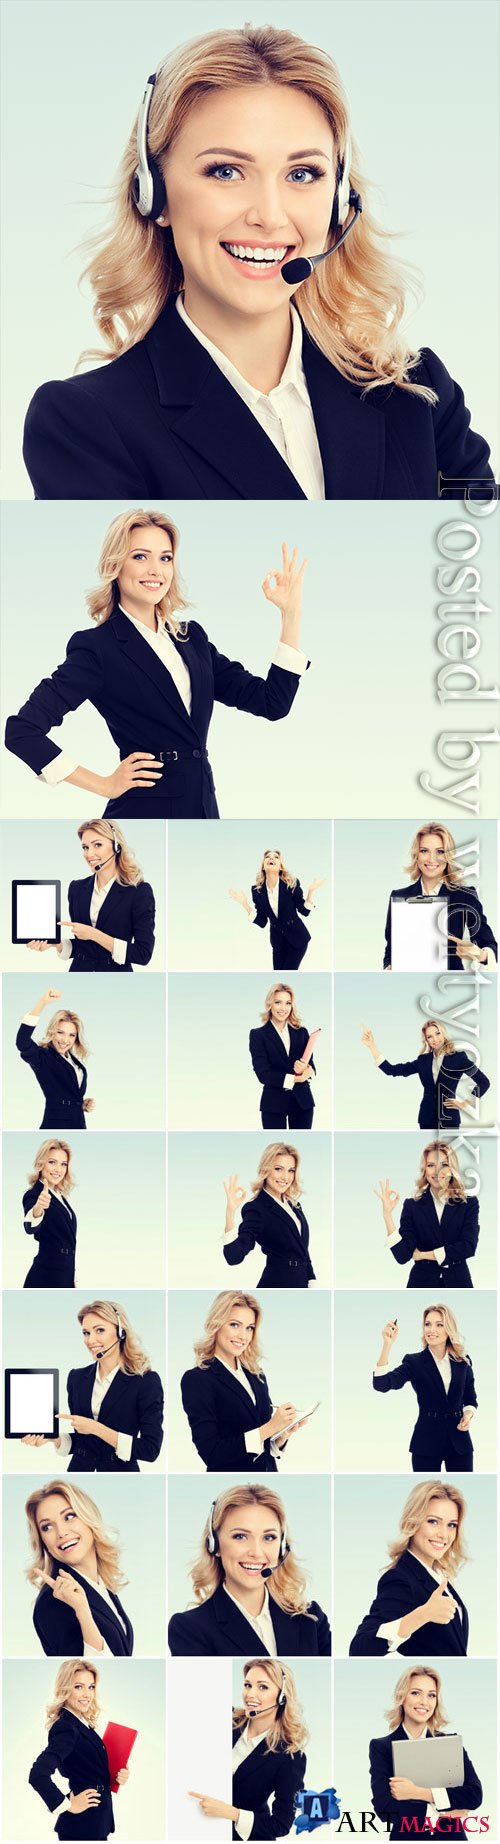 Business lady in various options stock photo